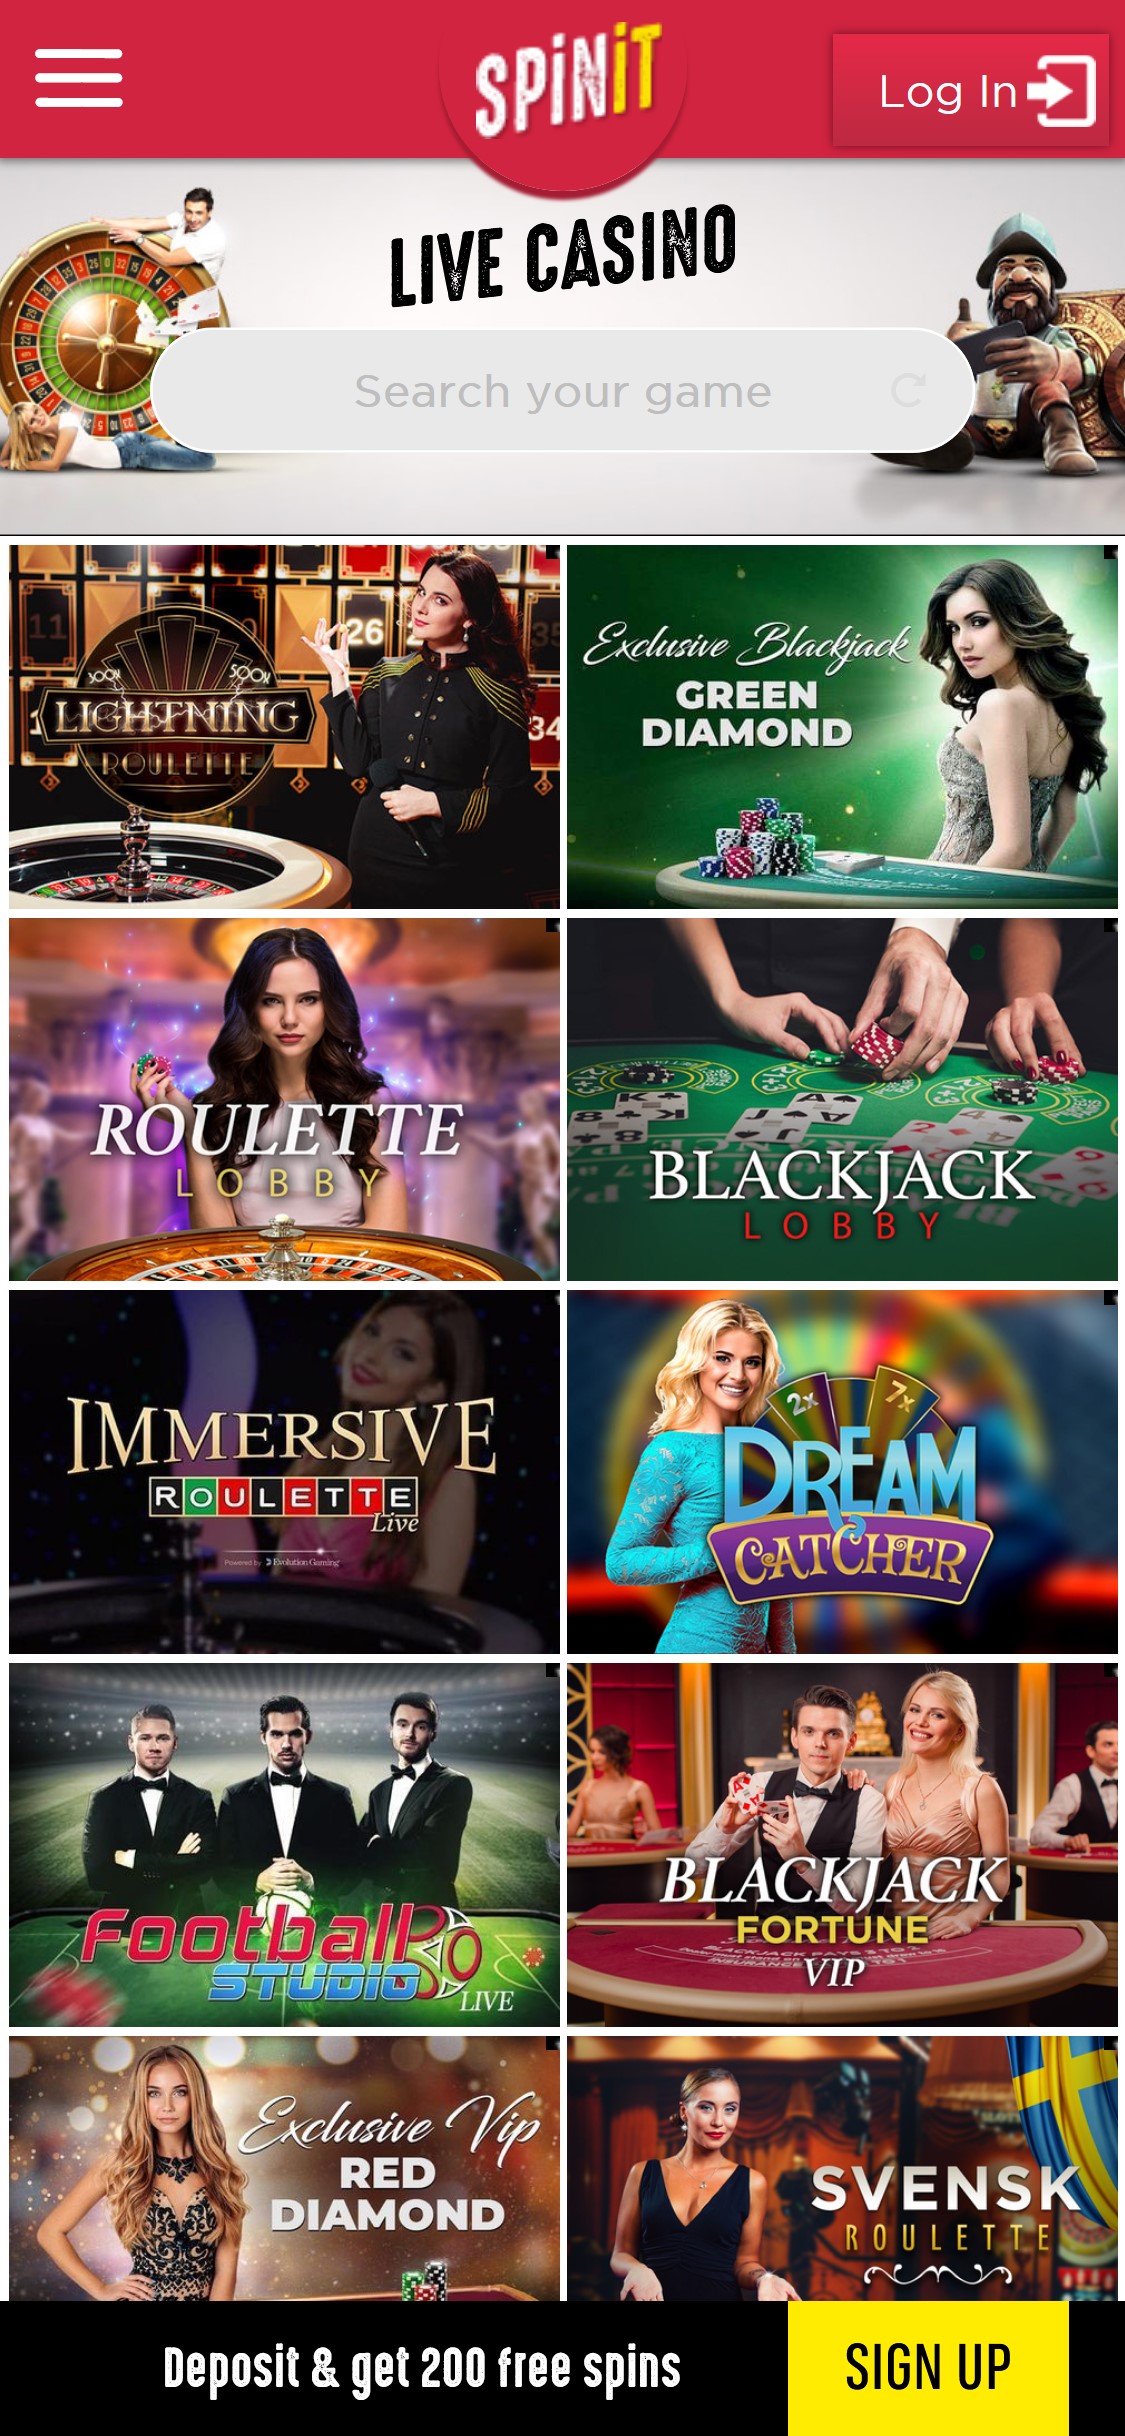 SpinIt Casino Mobile Live Dealer Games Review